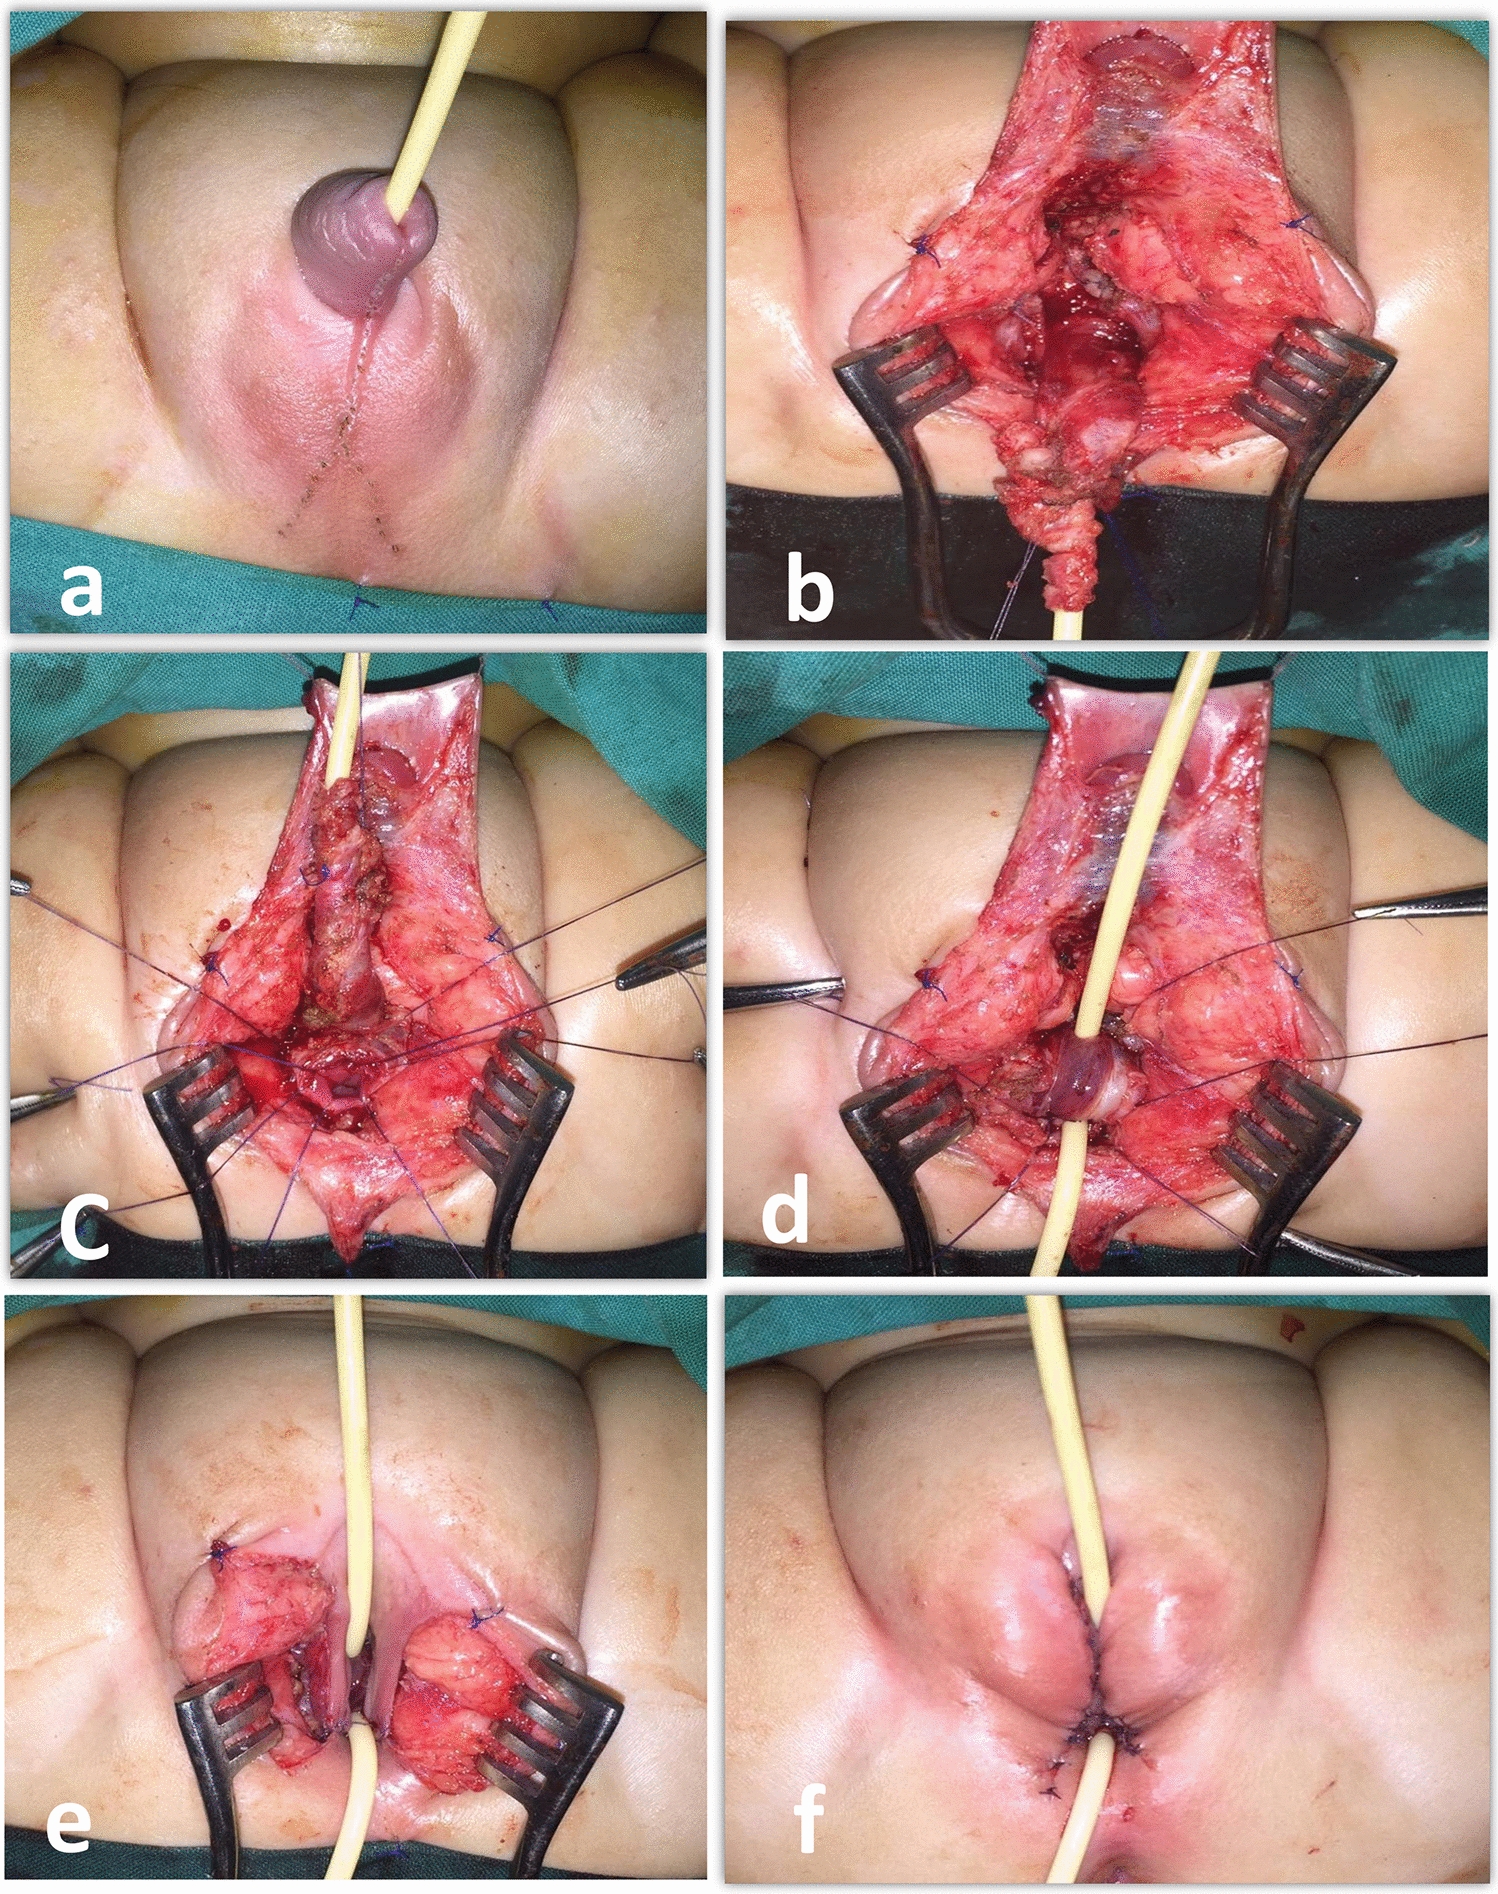 Outcomes of one-stage feminizing genitoplasty in children with congenital adrenal hyperplasia and severe virilization